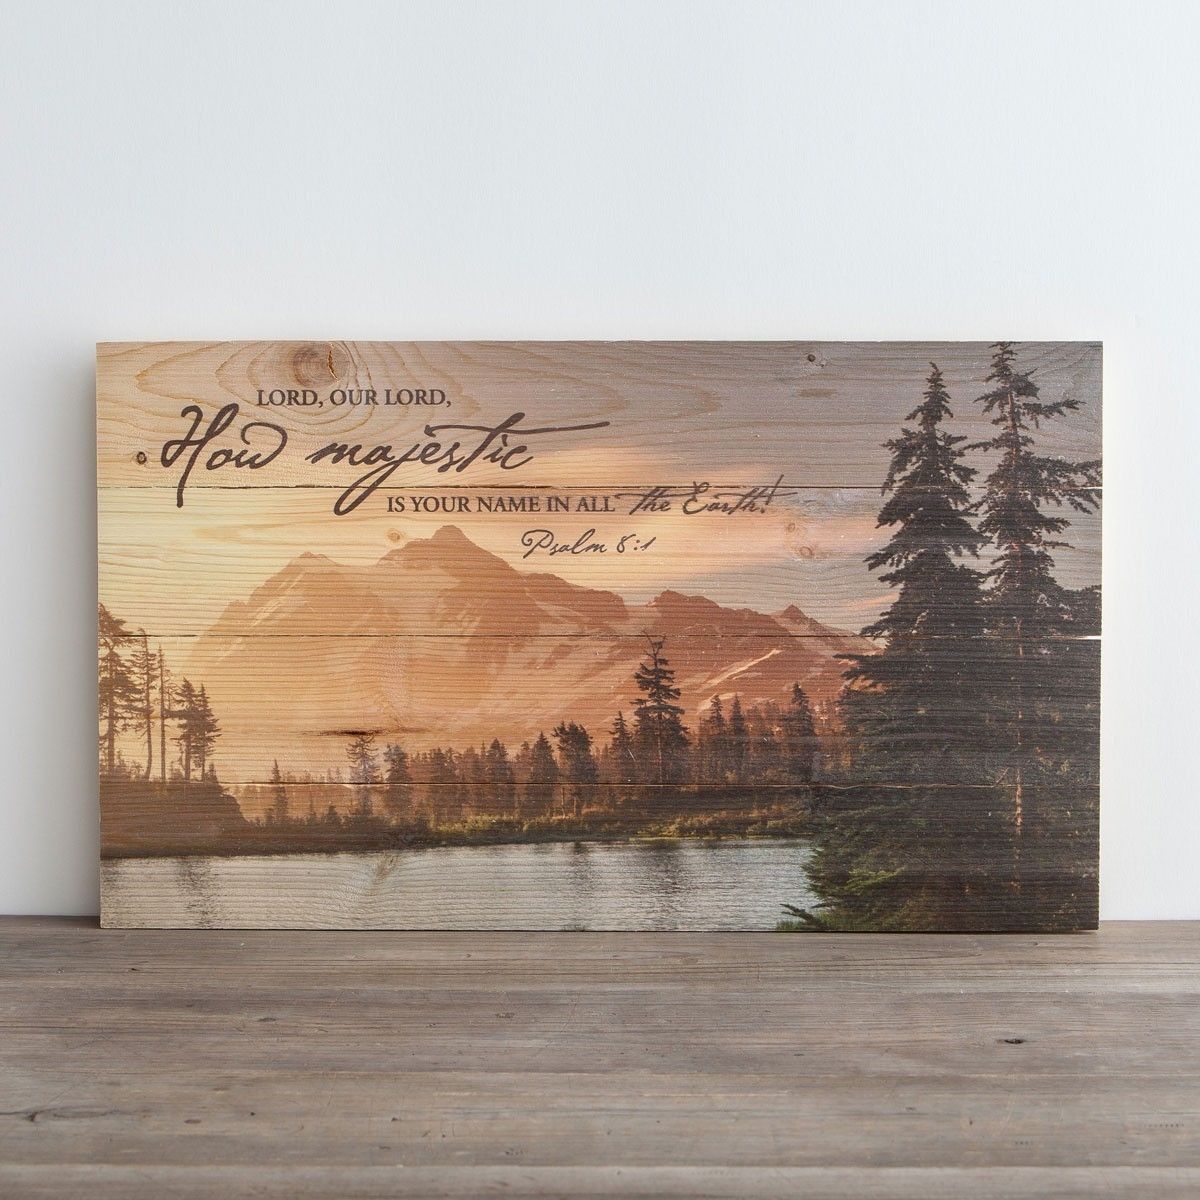 How Majestic Is Your Name – Plank Wall Art | Dayspring In Plank Wall Art (View 8 of 20)